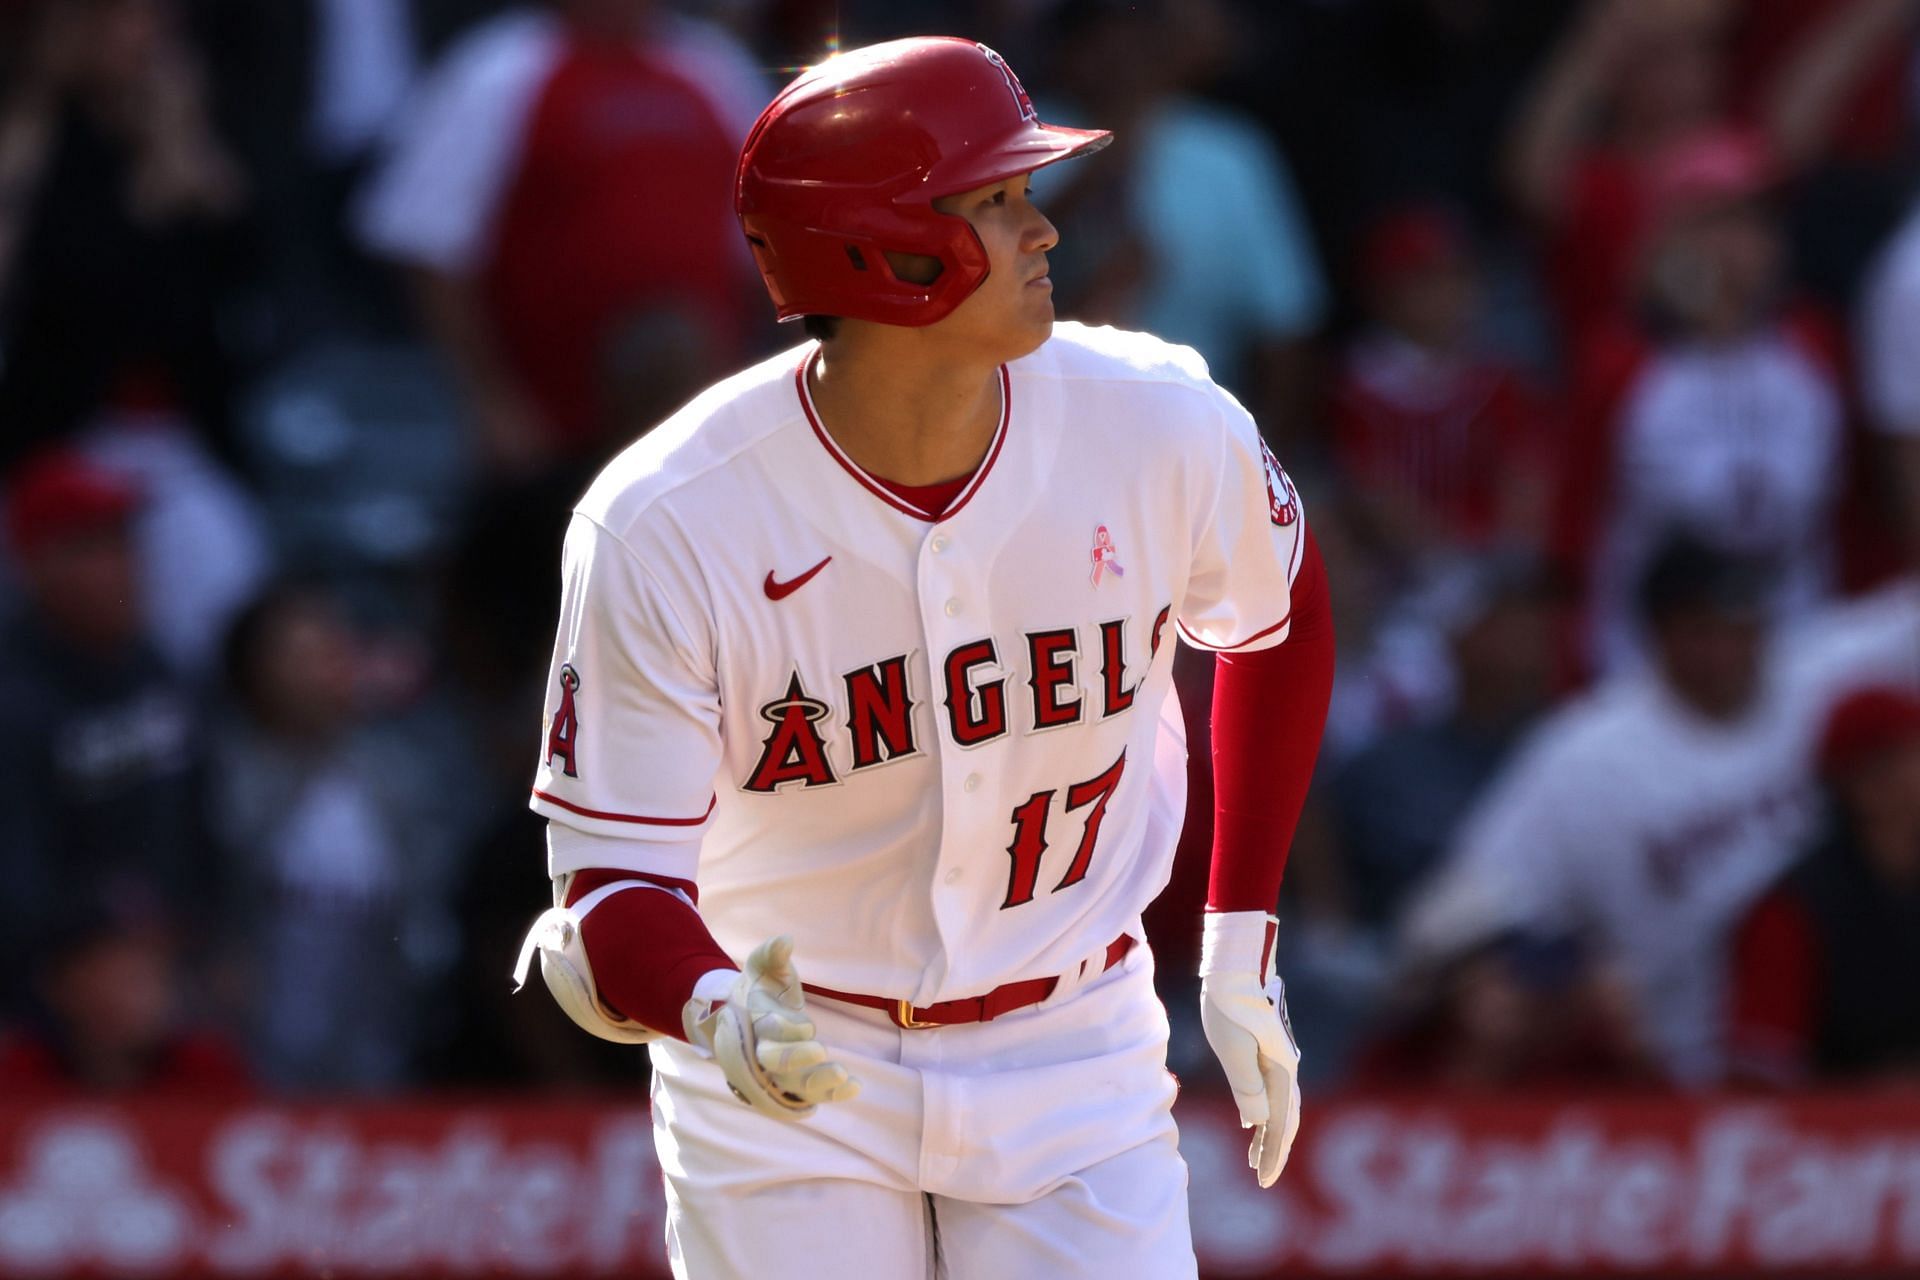 Los Angeles Angels superstar Shohei Ohtani has already shown us he can hit and pitch. Now he&#039;s showing off his baserunning skills.